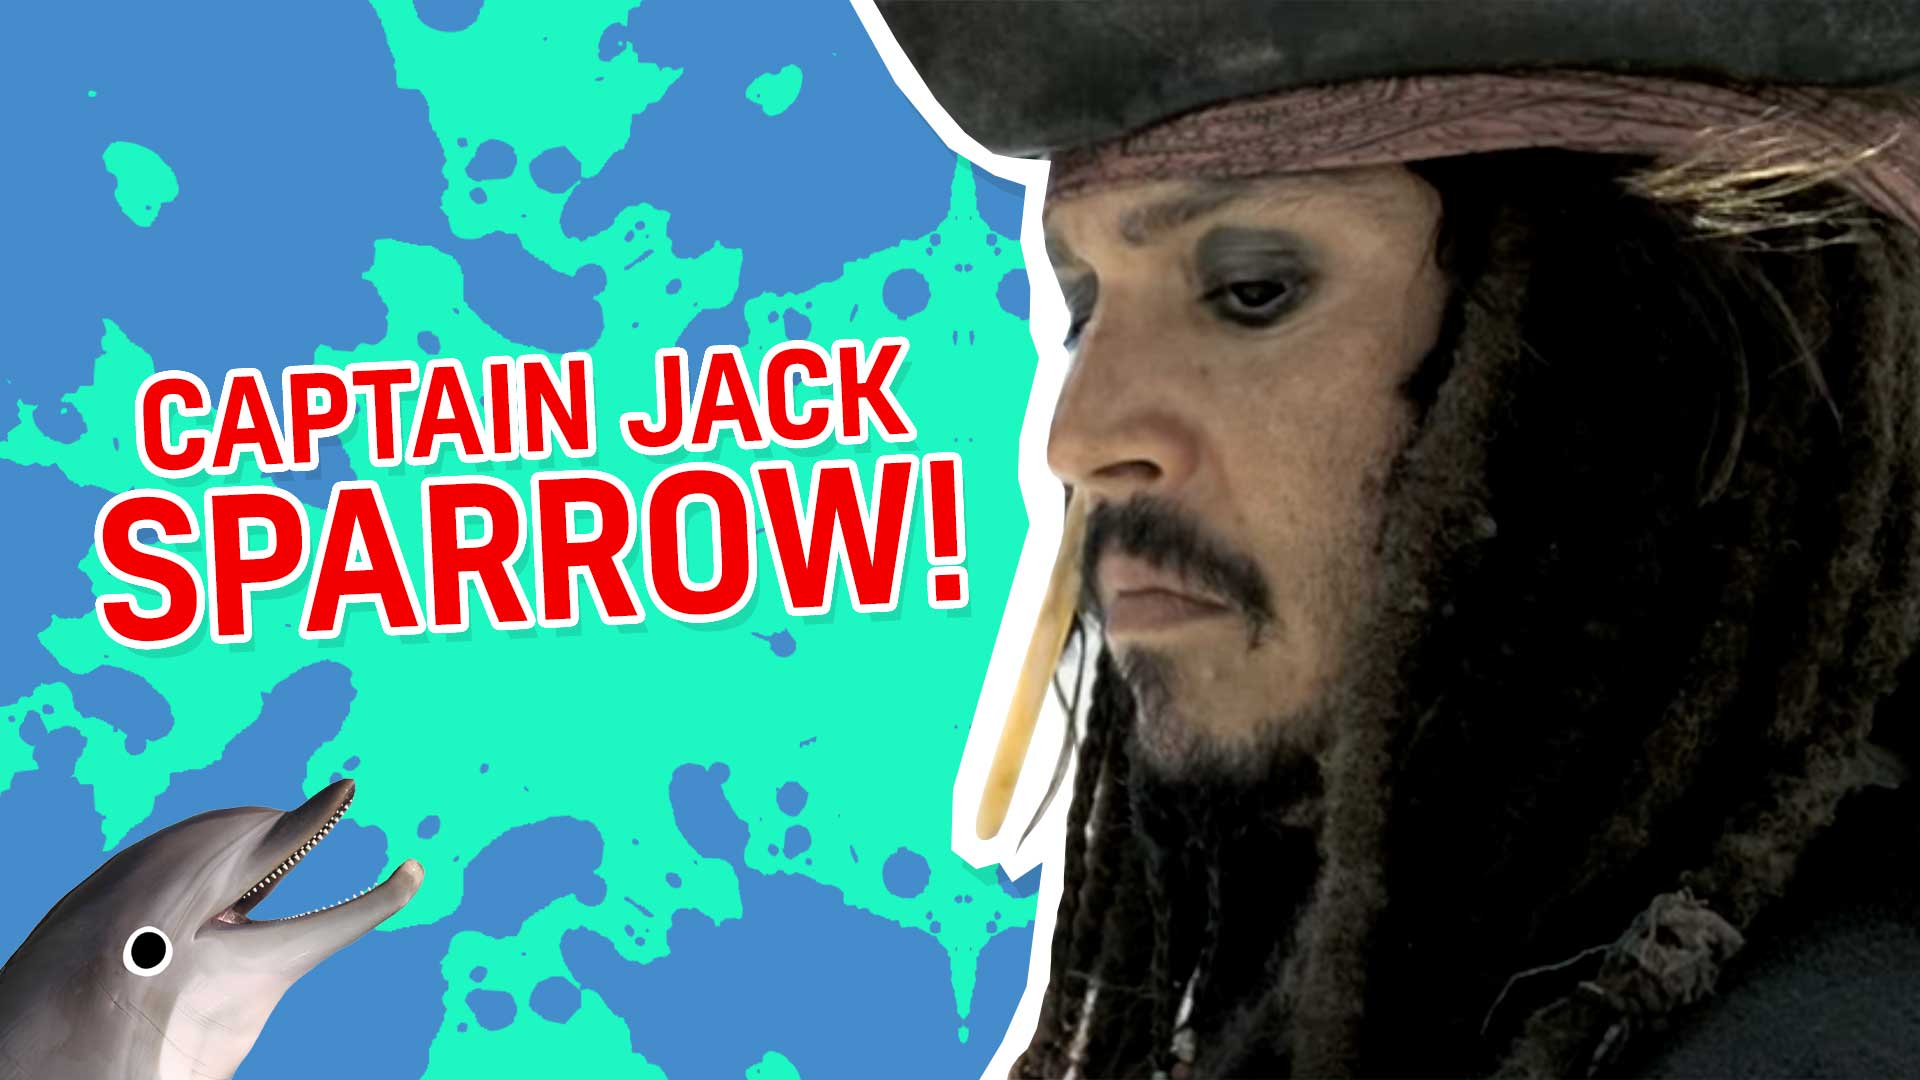 You are Captain Jack Sparrow!